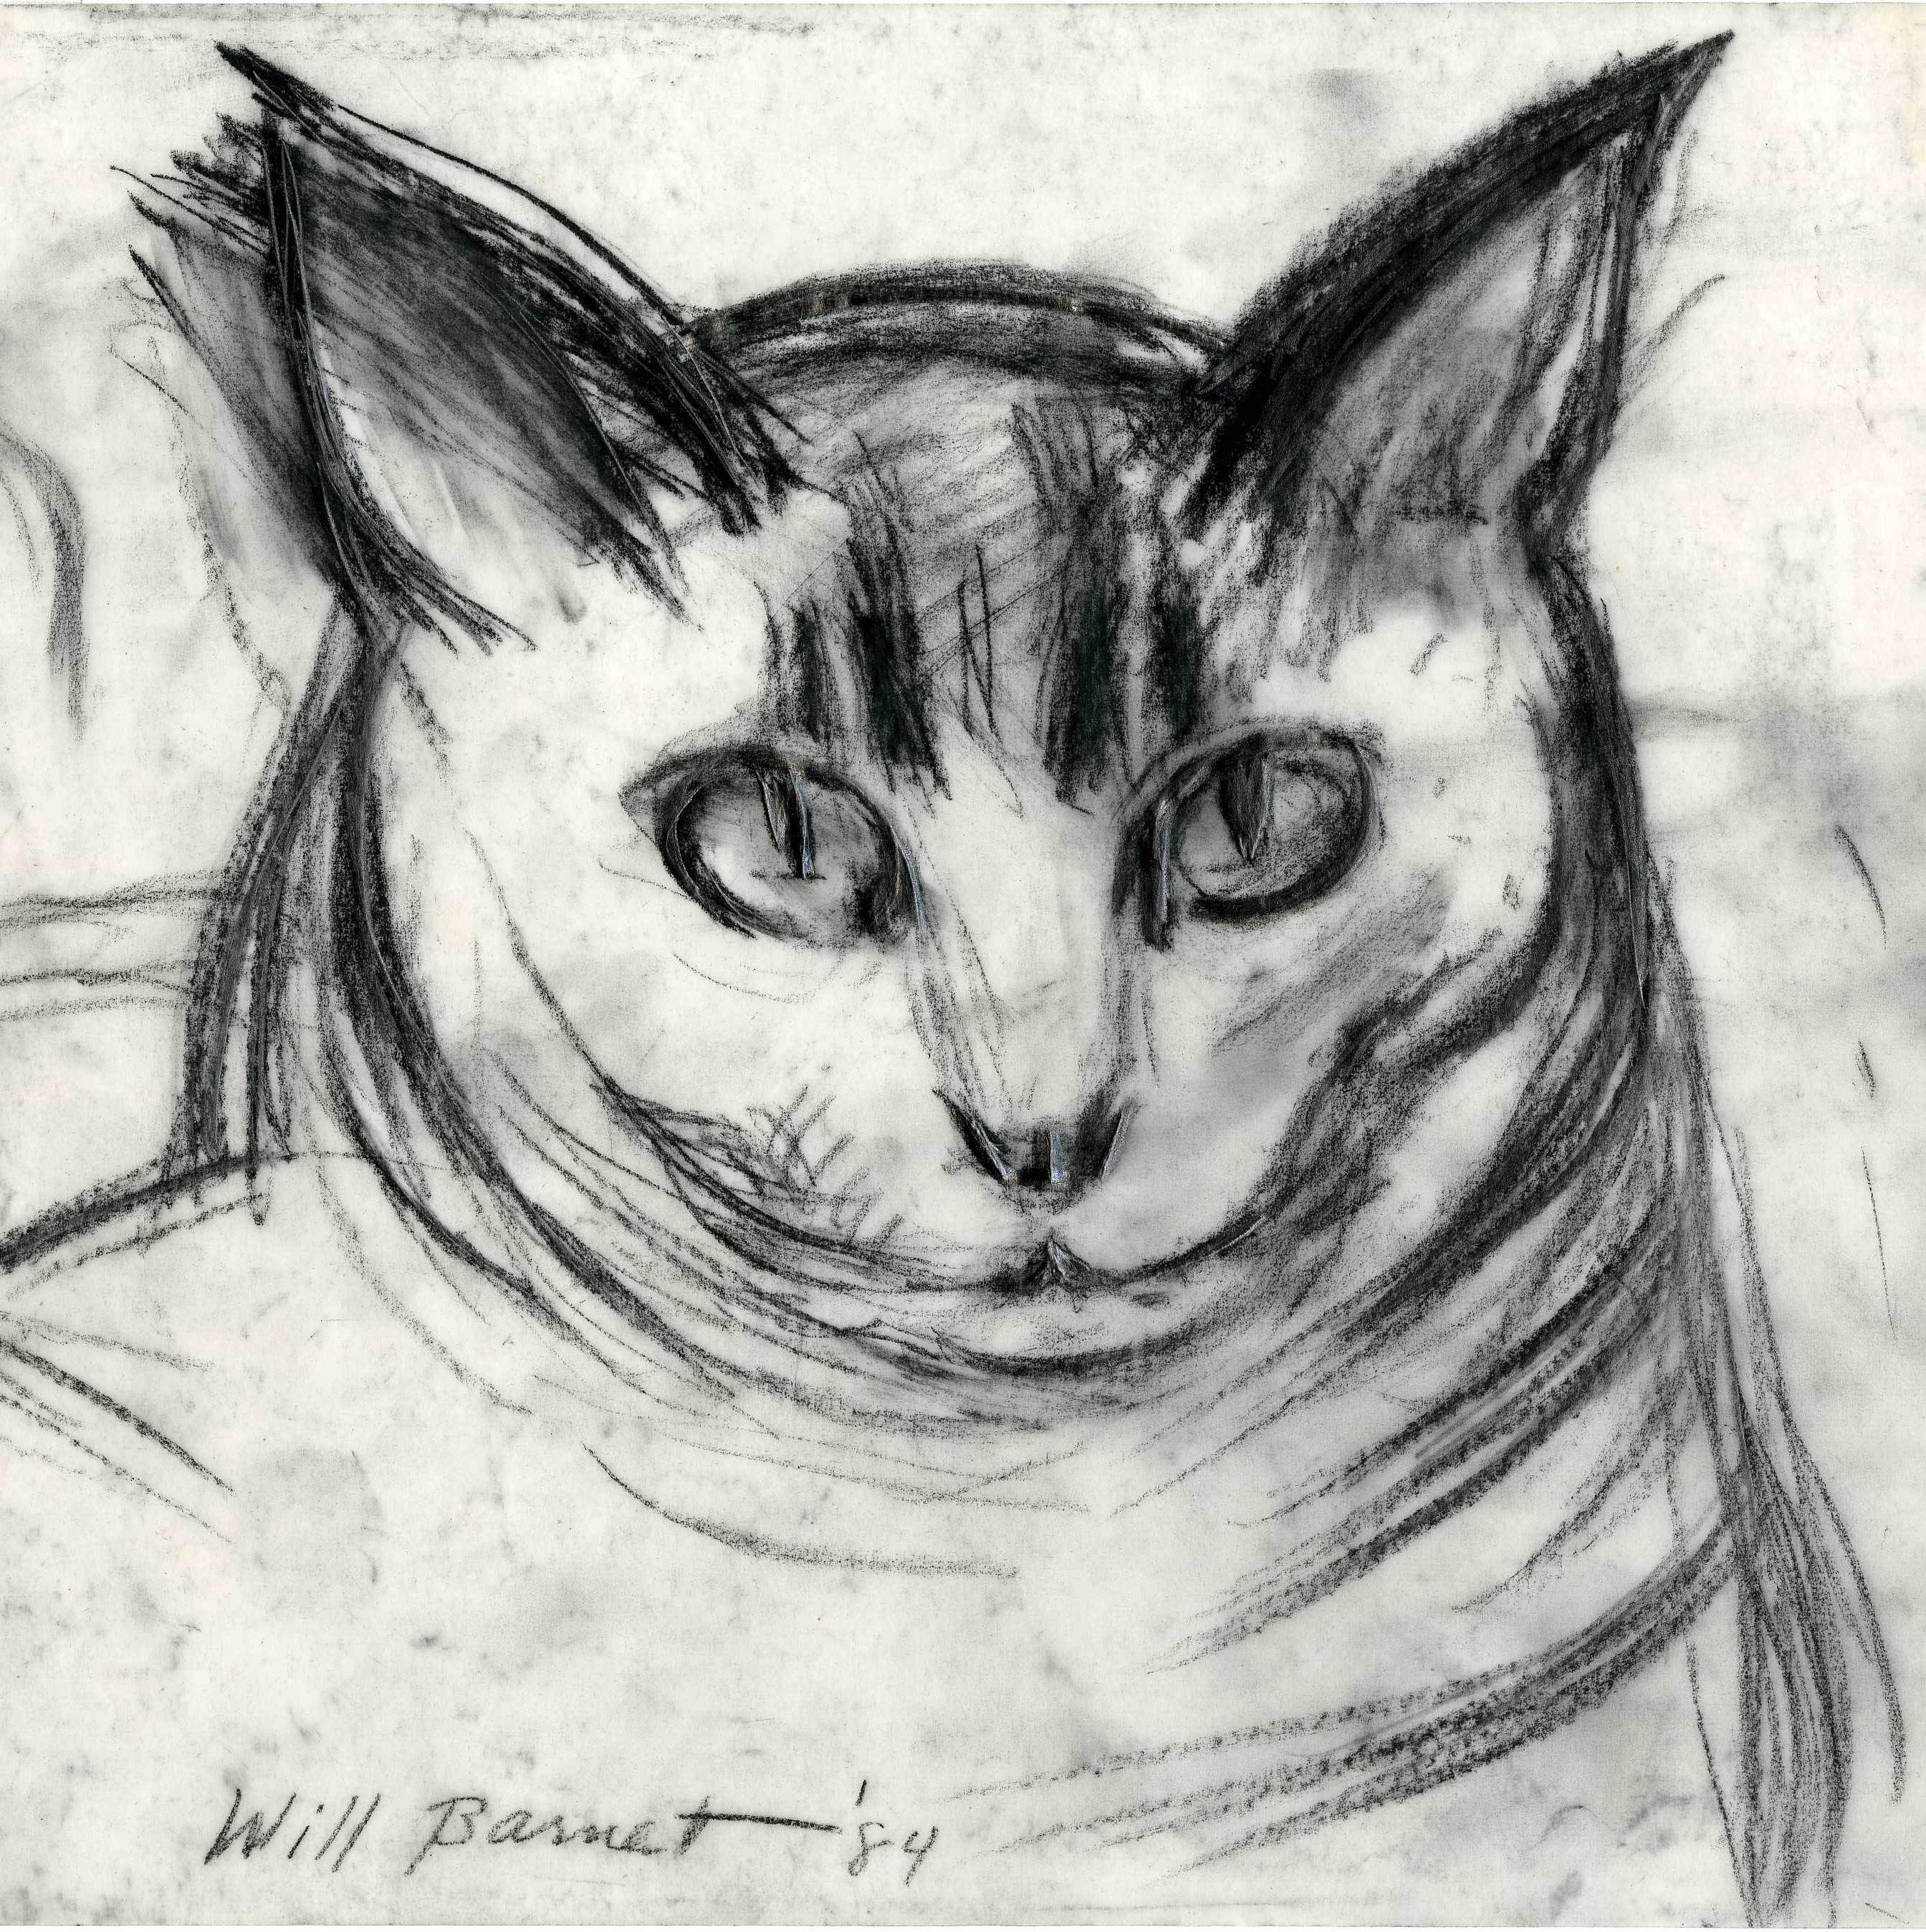 Minou-Study of Head
Charcoal and pencil on vellum, 1984
Signed and dated in pencil by the artist

Minou was Barnet's feline companion throughout many of his most prolific years. It has been said that if you entered Barnet's studio and Minou did not